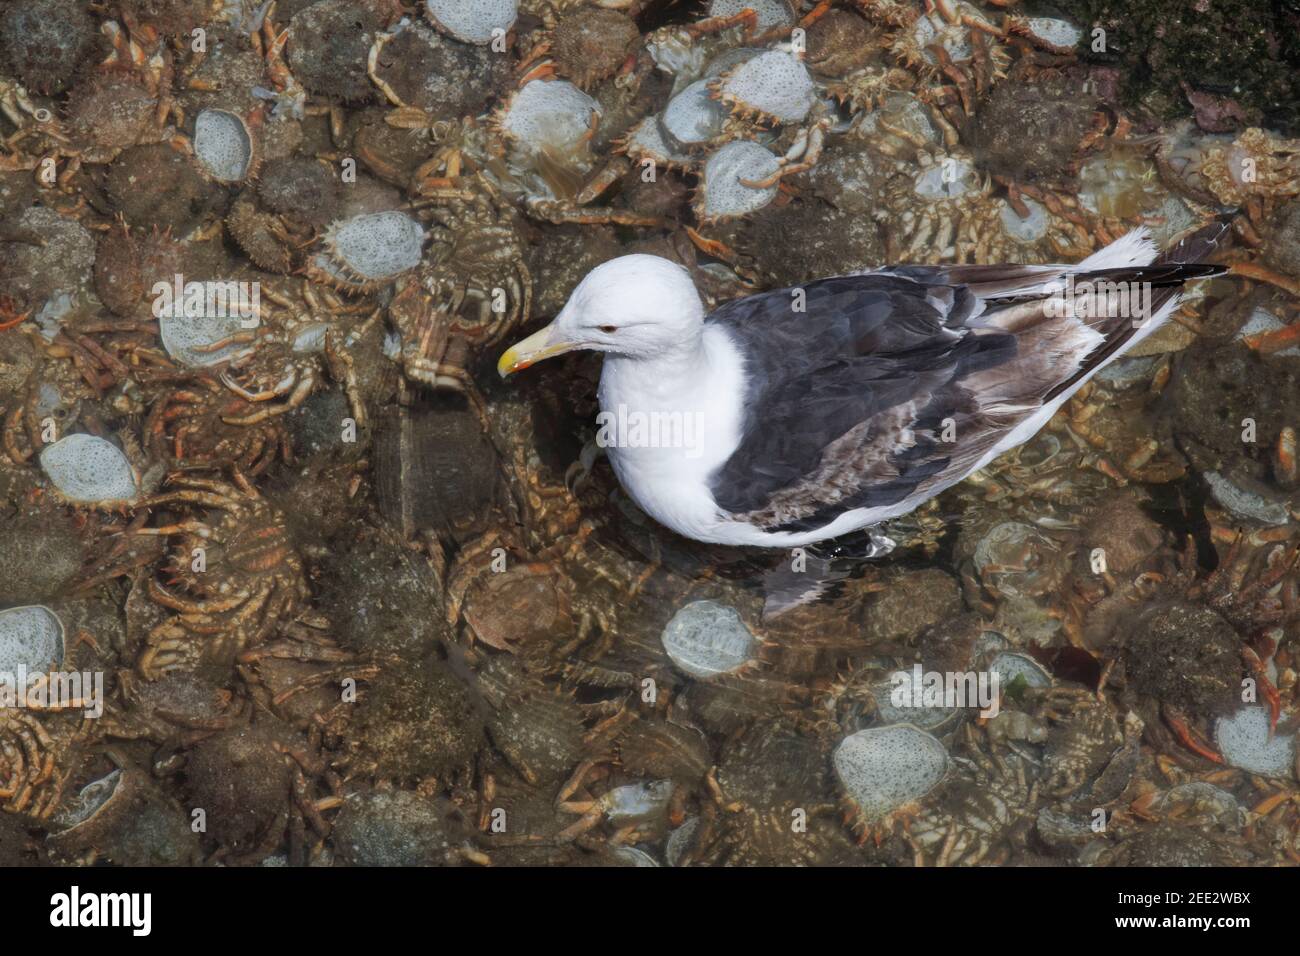 Great black-backed gull (Larus marinus) subadult wading in a rock pool crammed with cast shells of moulted Spiny spider crabs (Maja squinado), Wales, Stock Photo